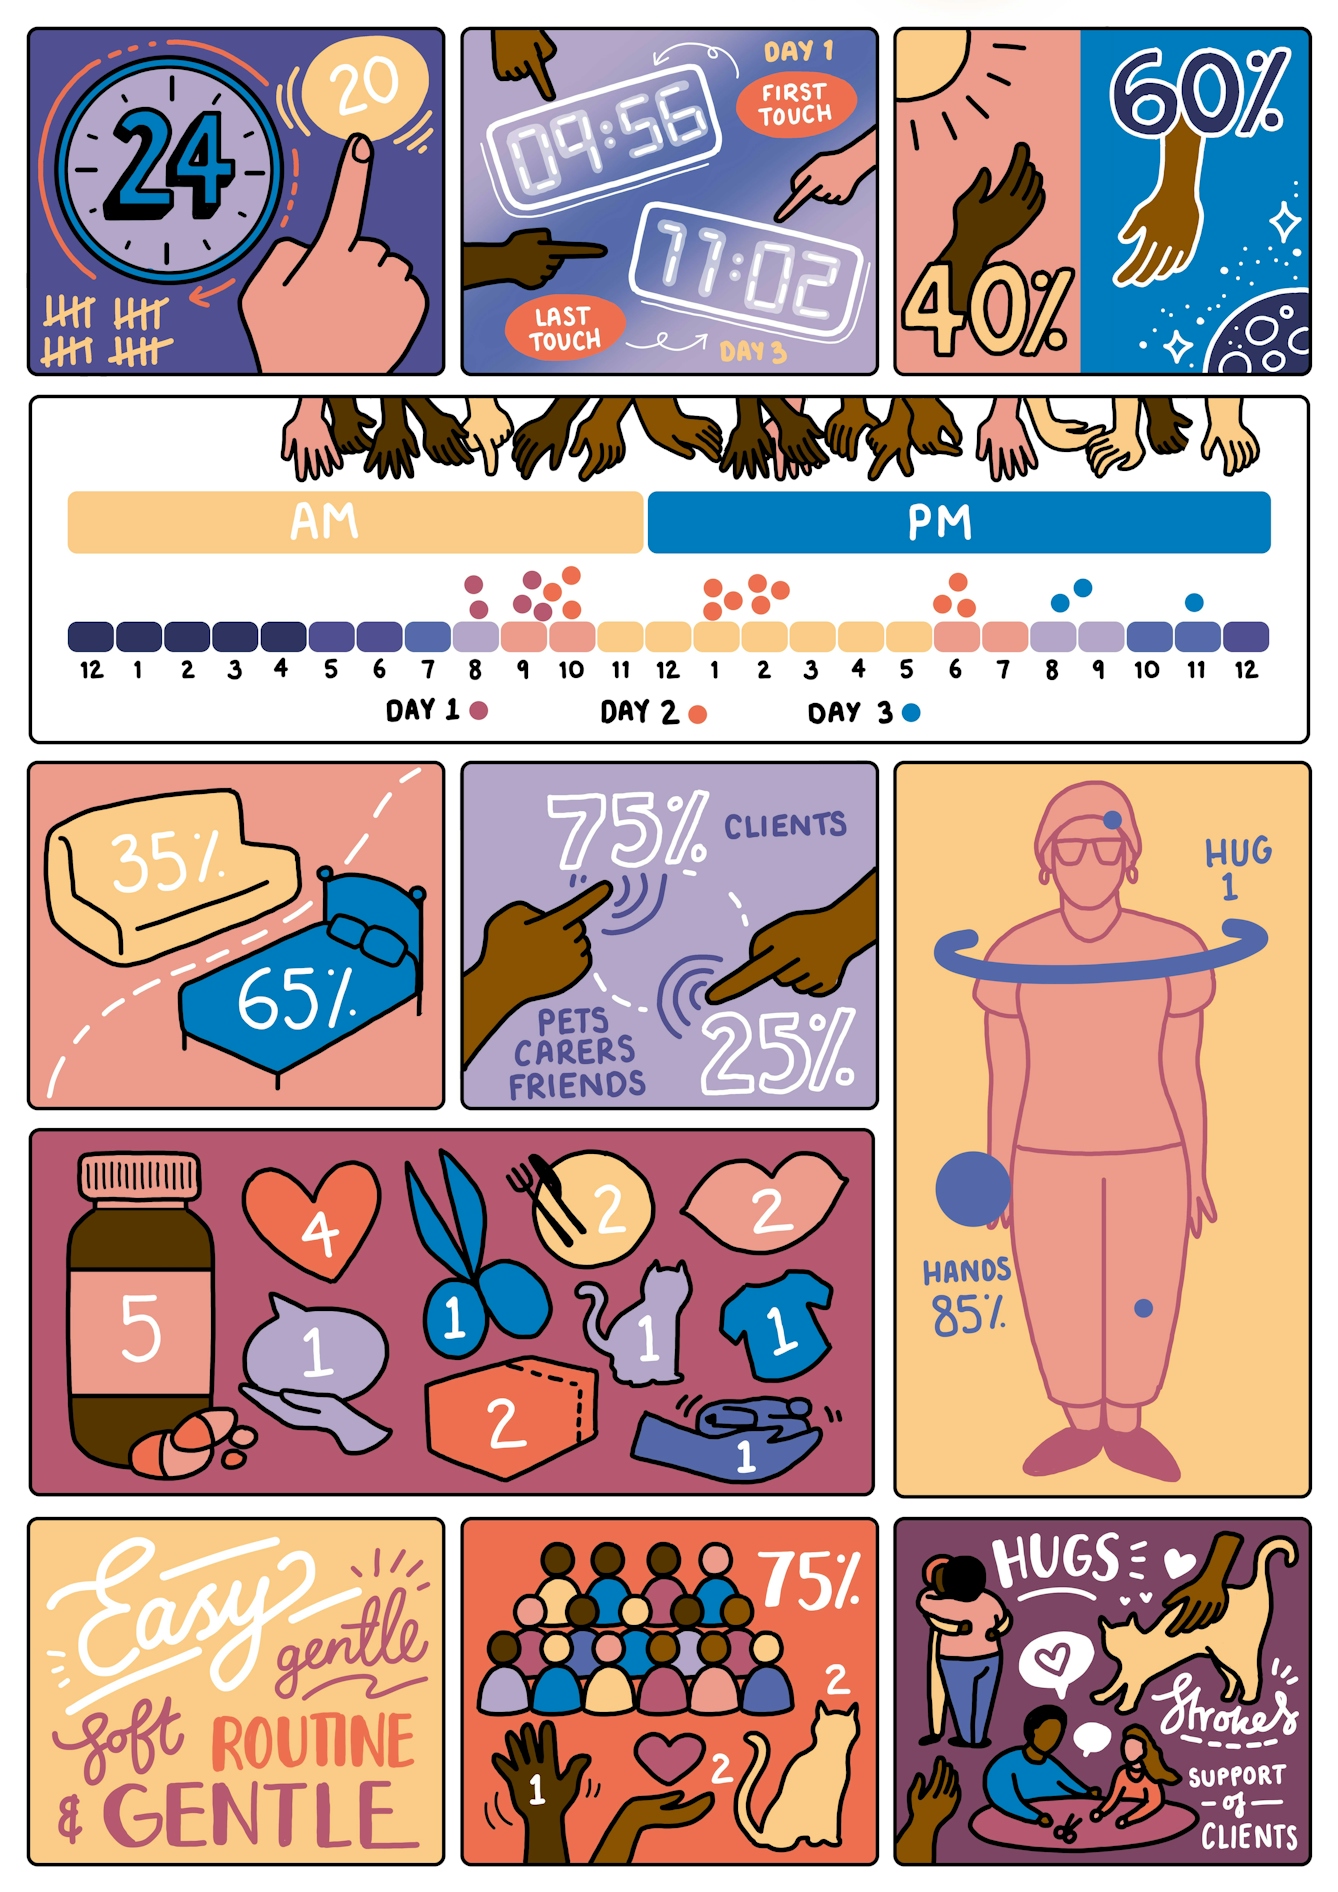 Digital illustration infographic showing data about Joyce Williams and the different touches she encounters in a day. 